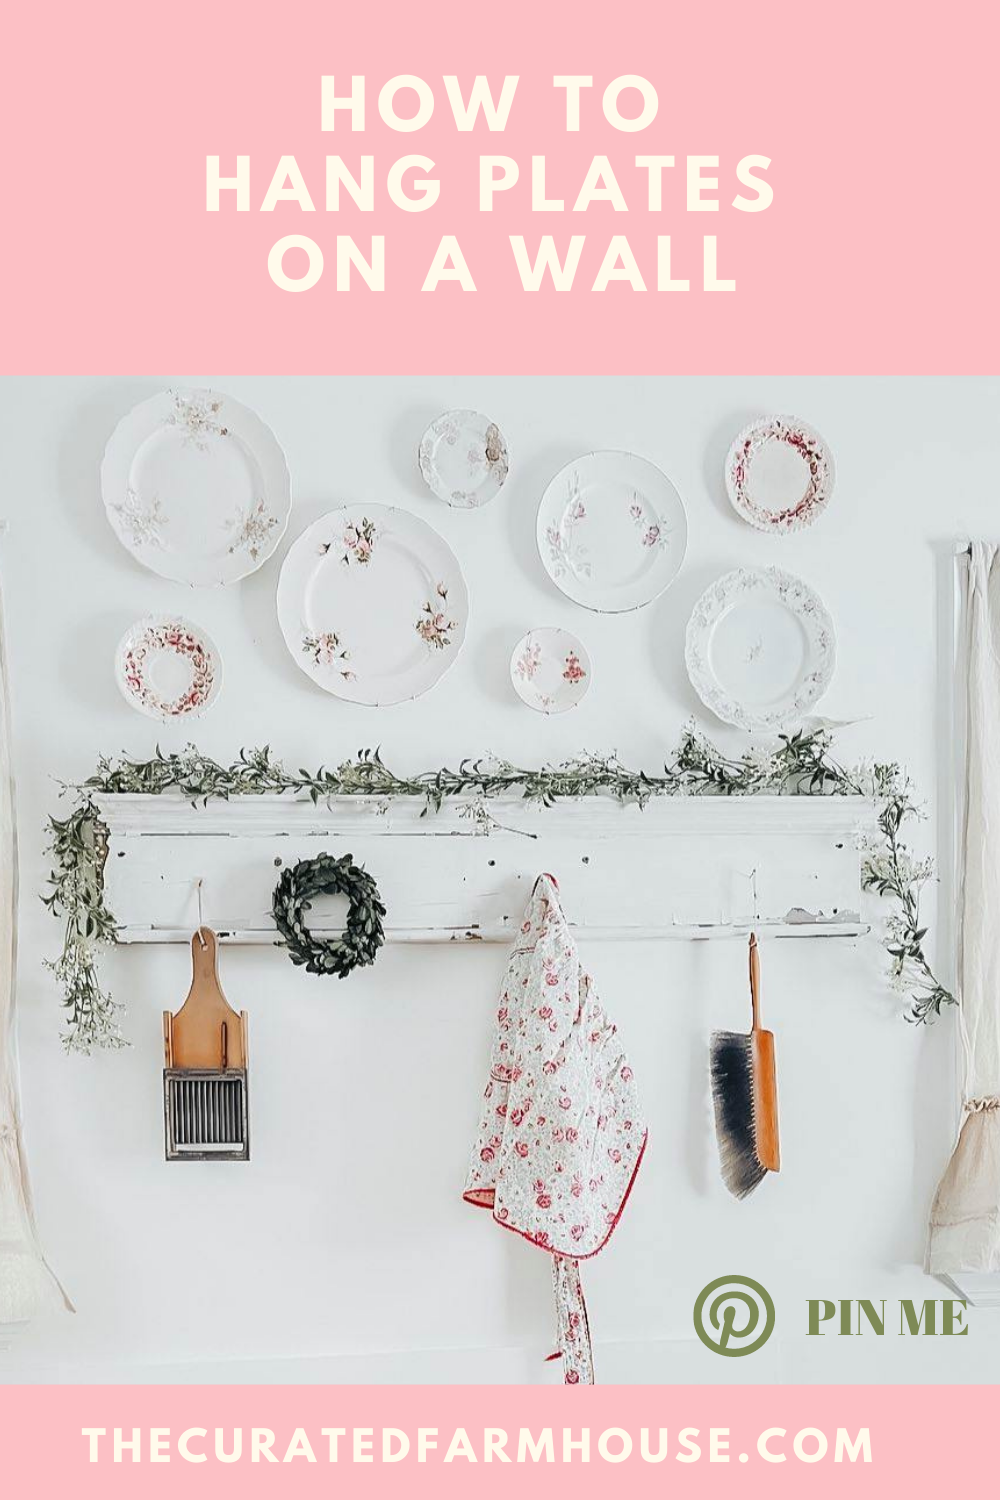 How To Hang Plates on a Wall